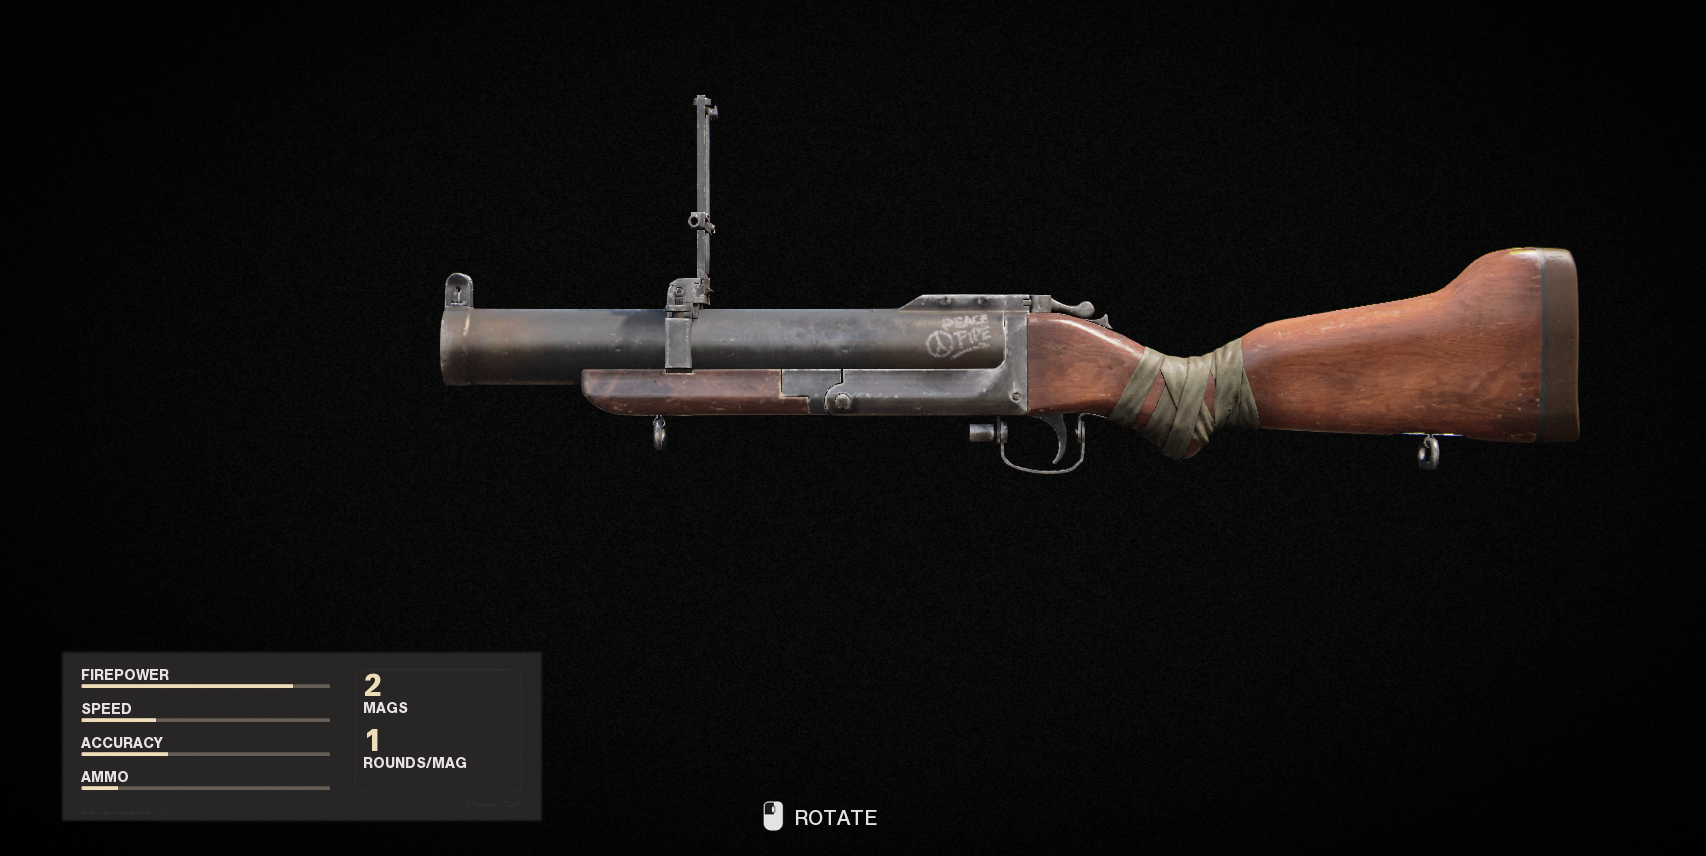 Call of Duty Black Ops Cold War Weapons - M79